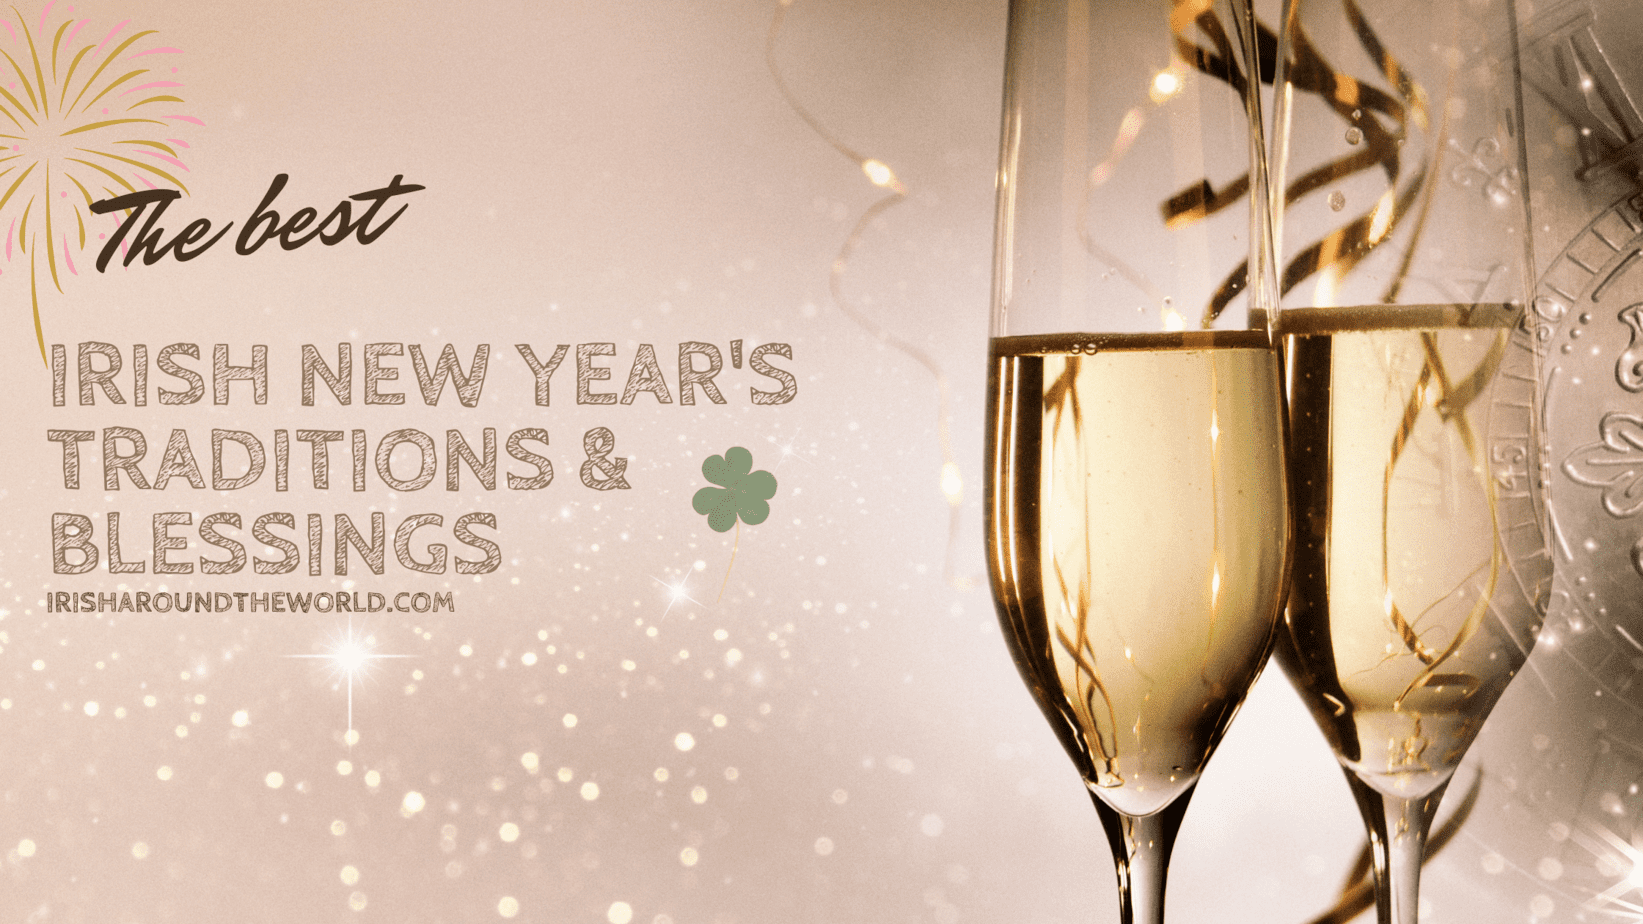 The Best Irish New Years Traditions And Blessings